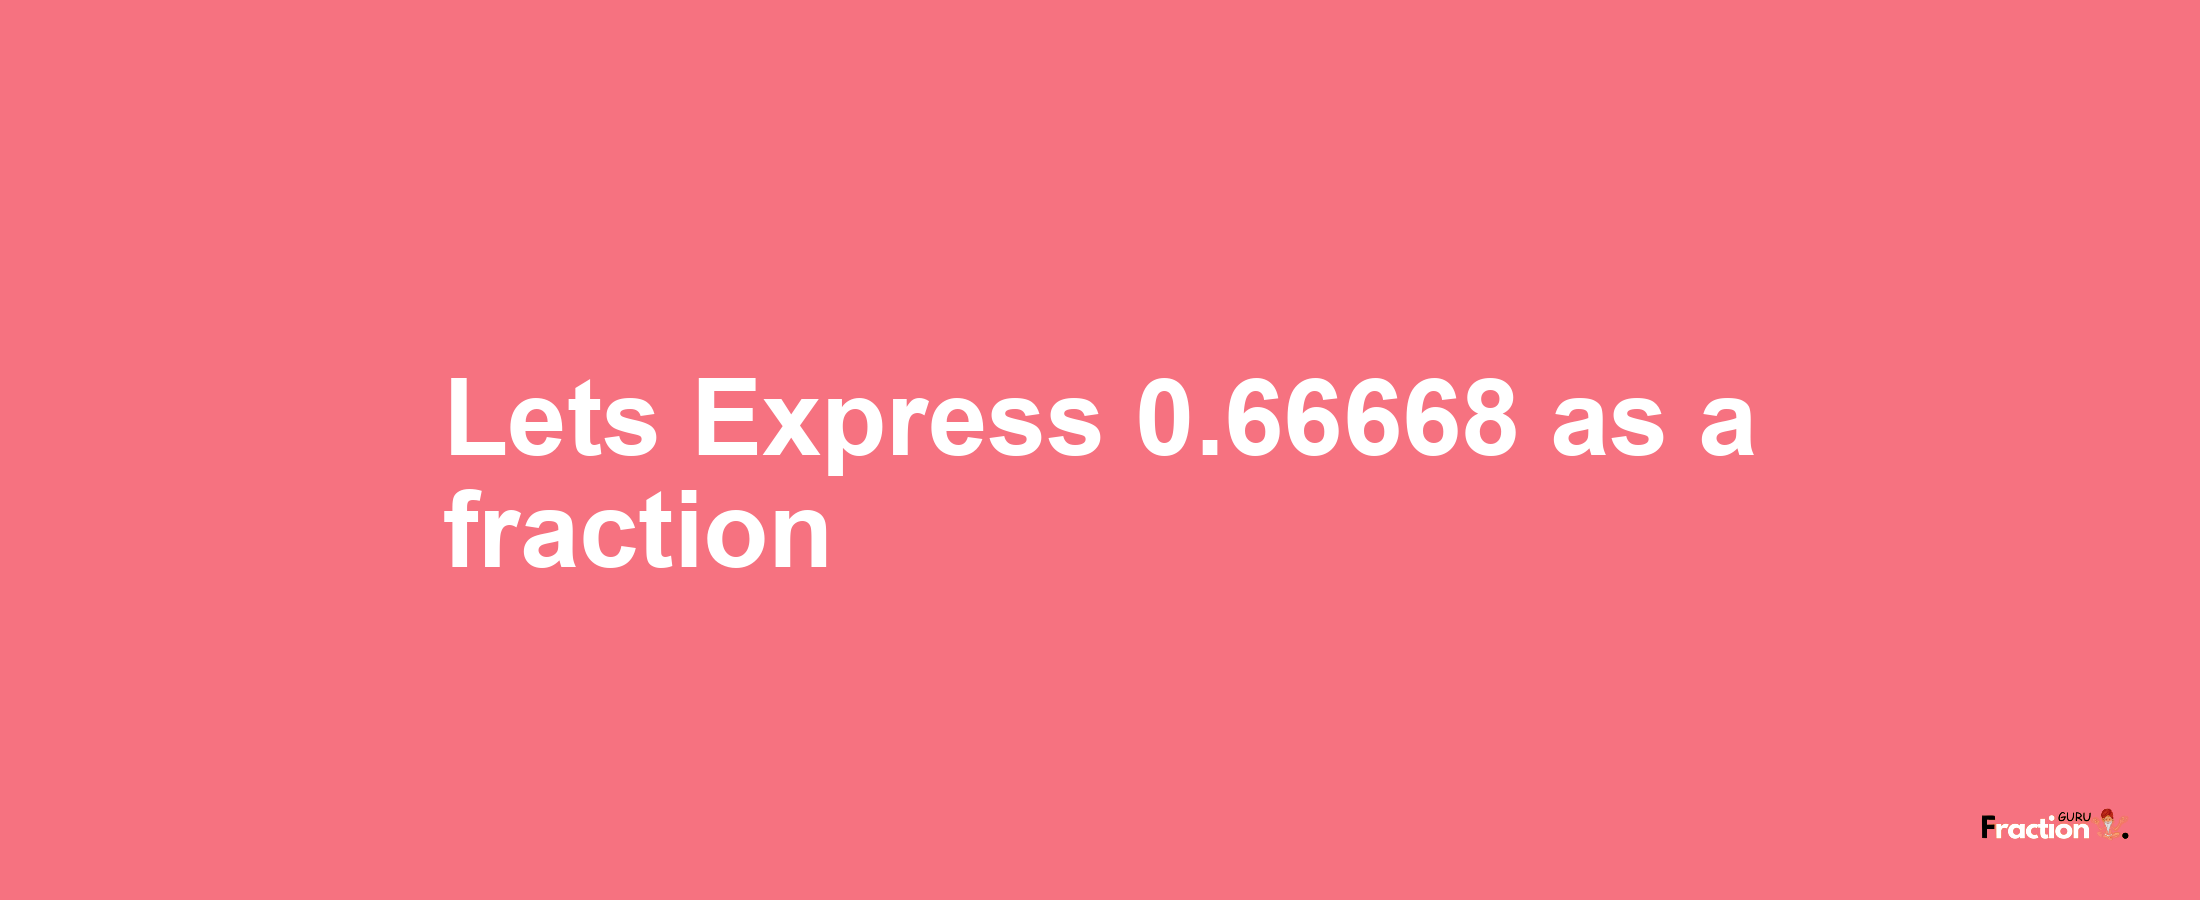 Lets Express 0.66668 as afraction